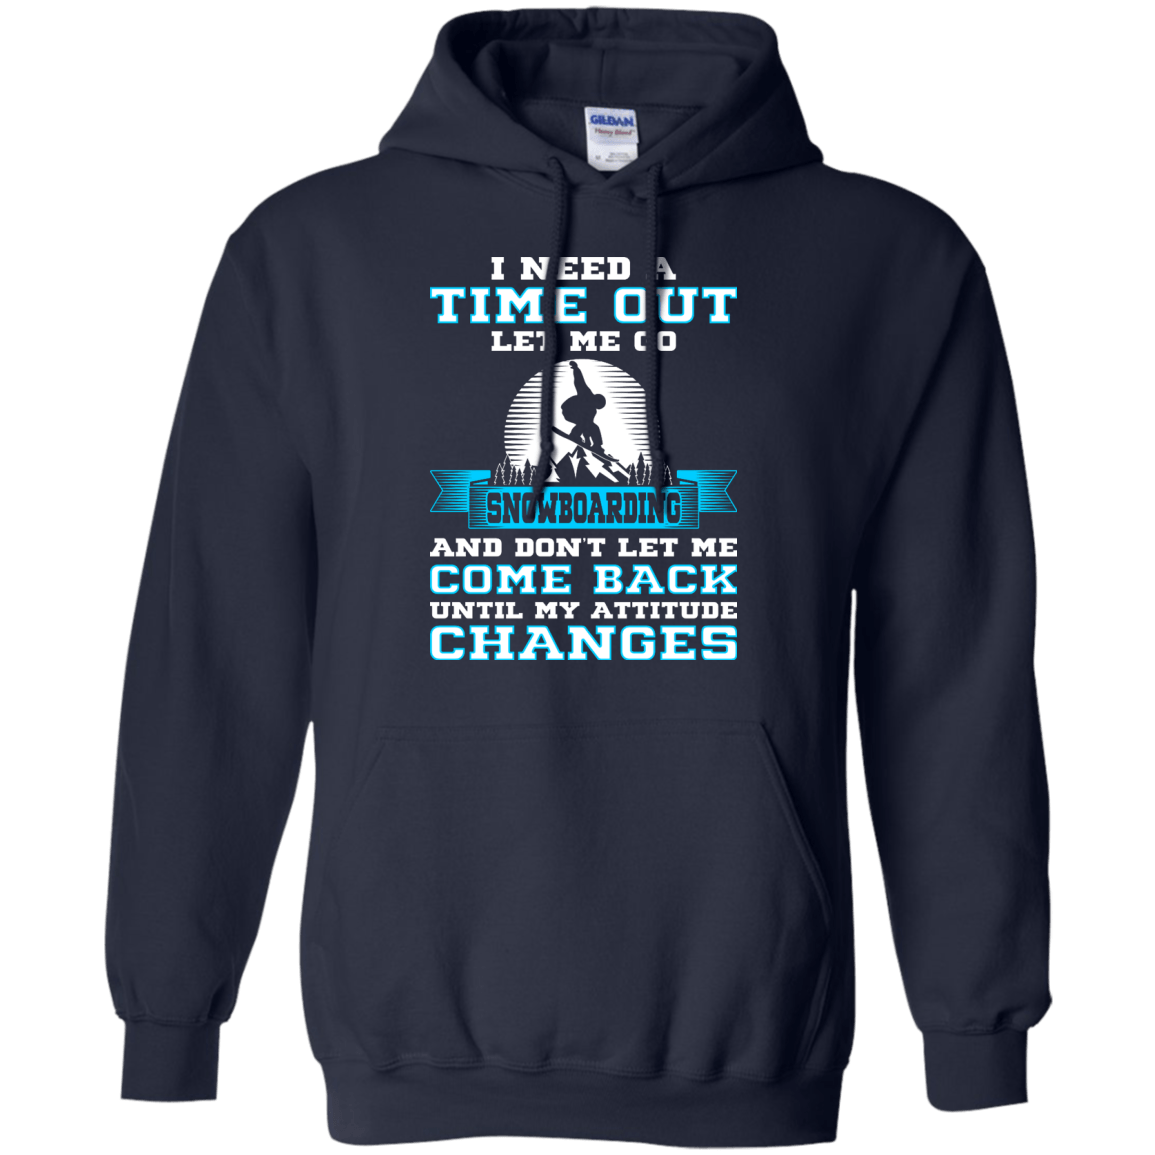 I Need A Time Out Let Me Go Snowboarding And Don't Let Me Come Back Until My Attitude Changes Hoodies - Powderaddicts